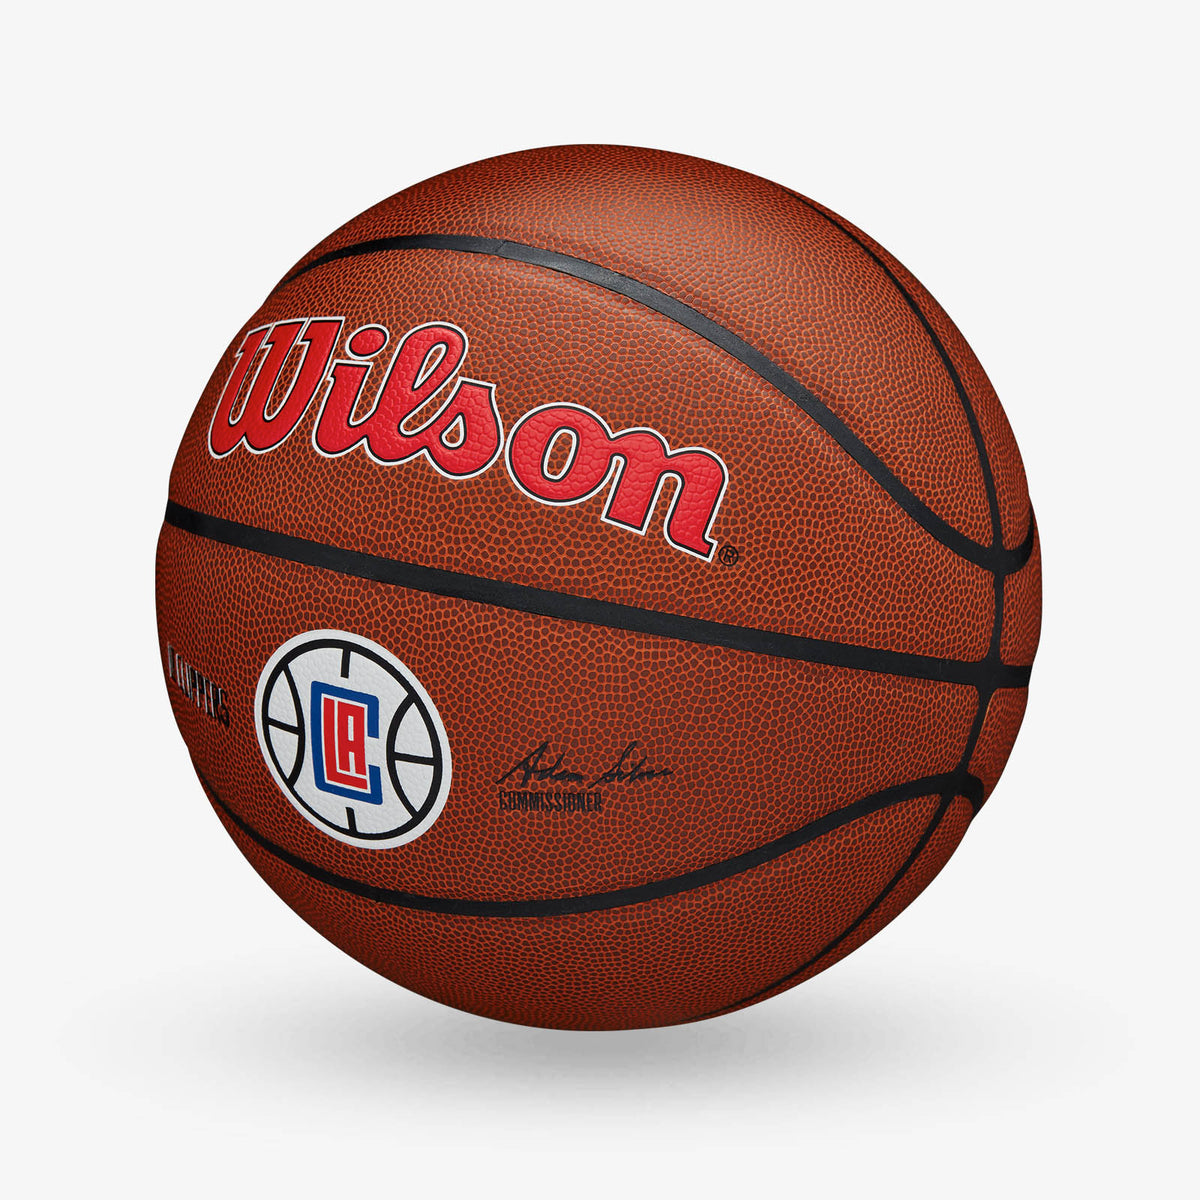 Los Angeles Clippers NBA Team Alliance Basketball - Size 7